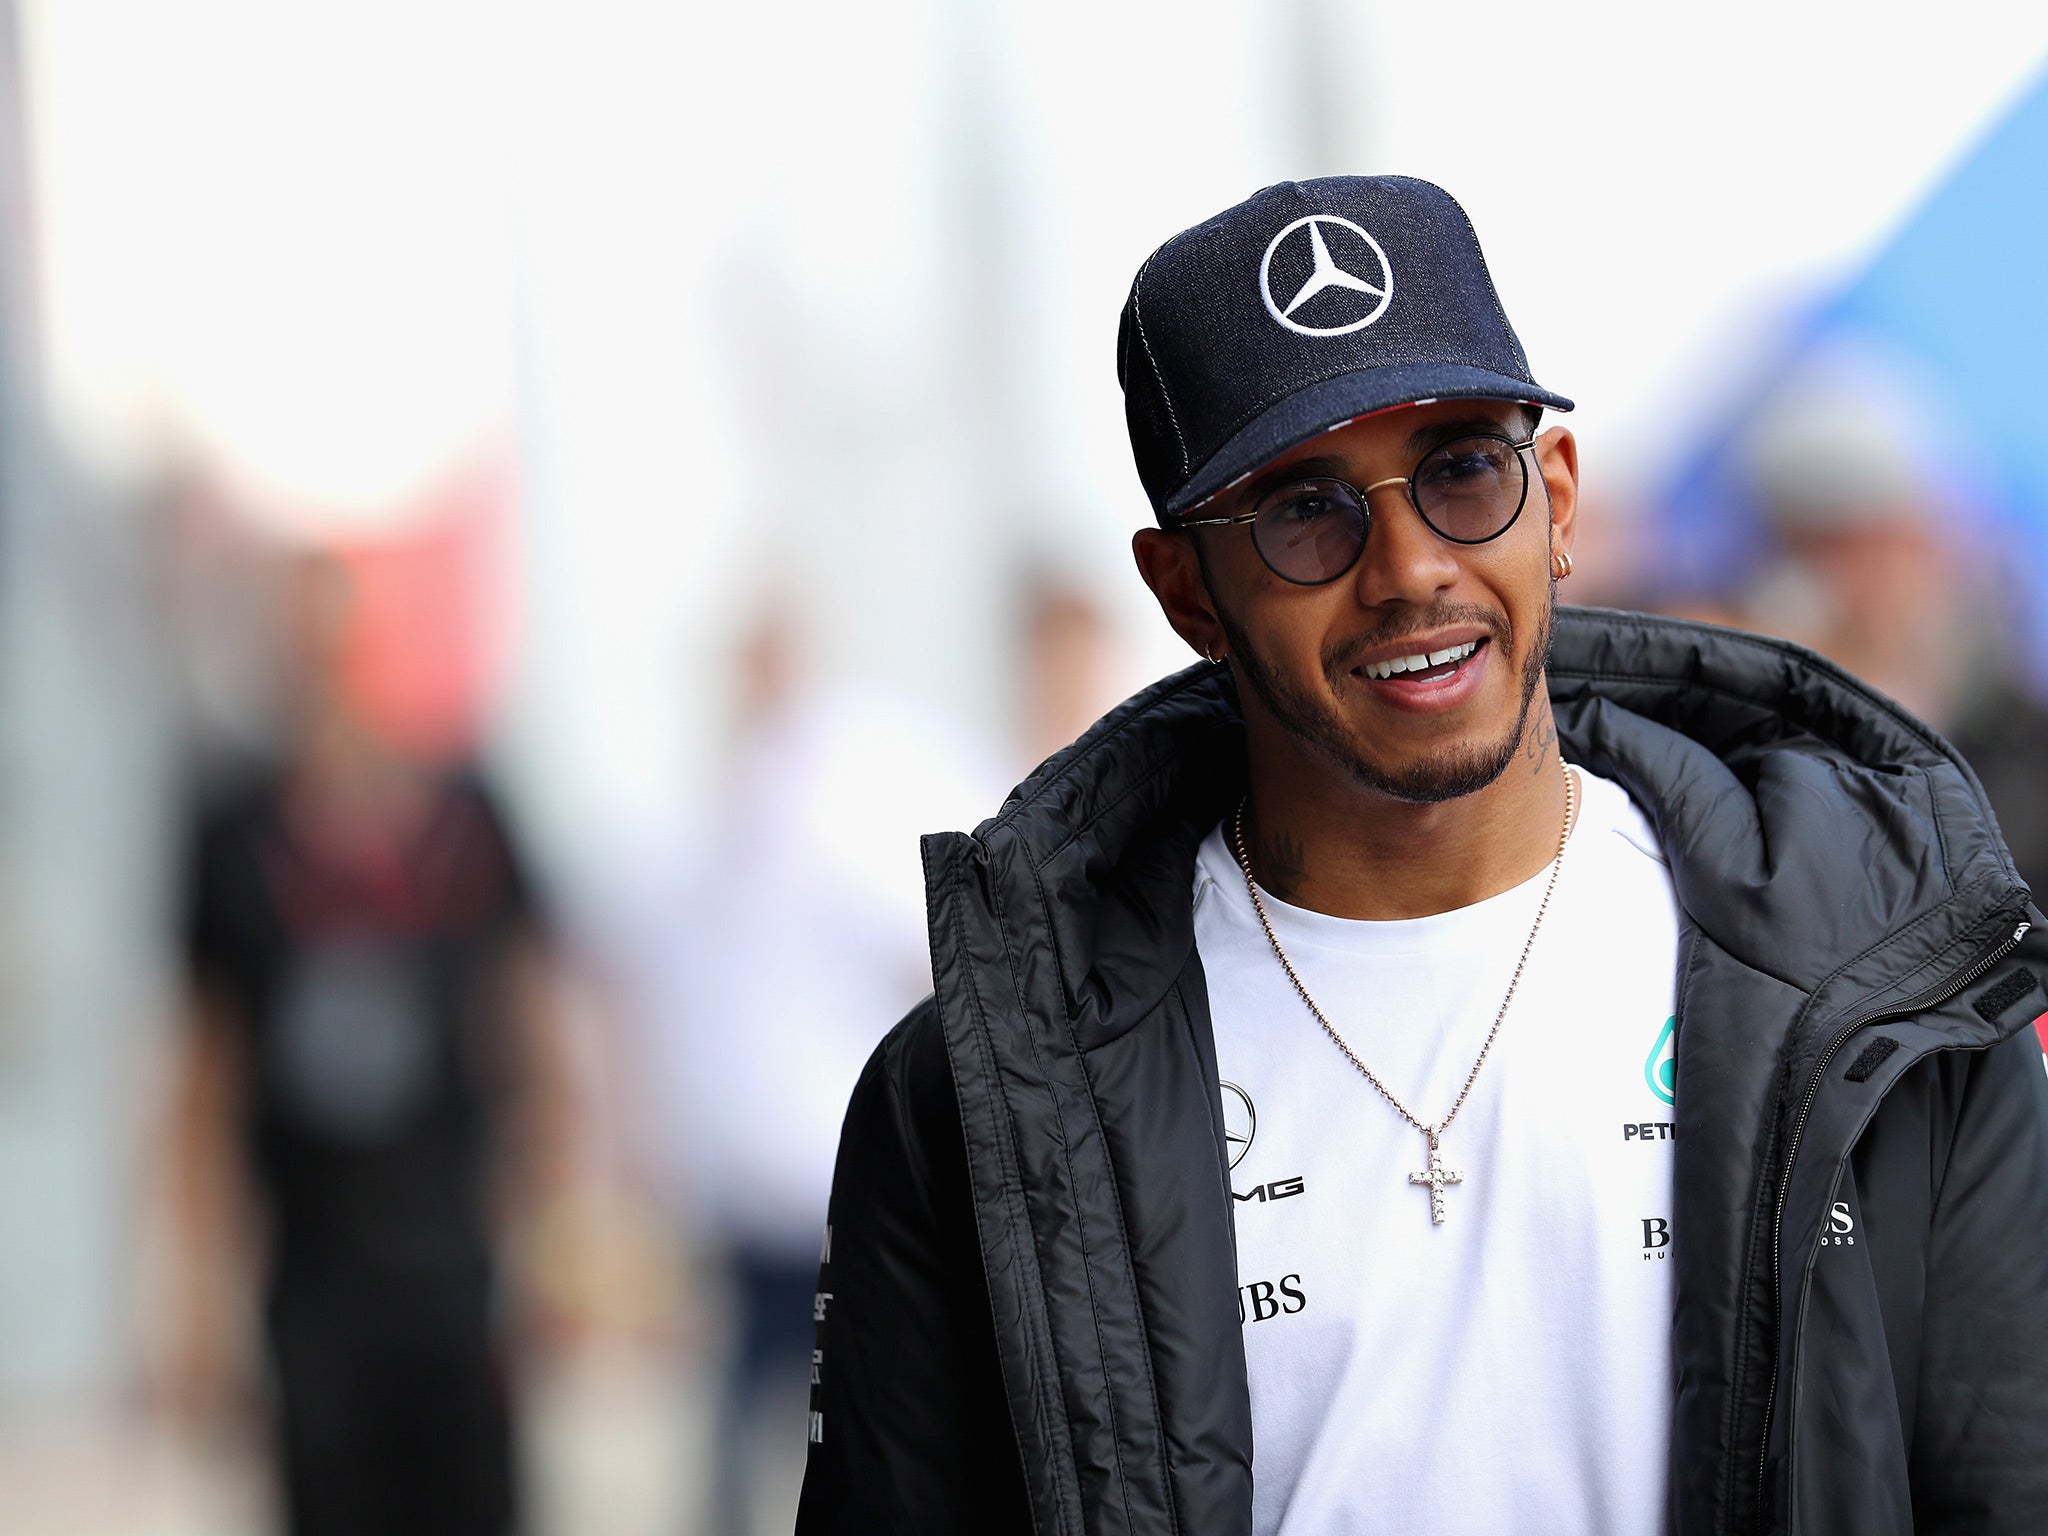 Lewis Hamilton was was right on his Mercedes team-mate's tail in both sessions